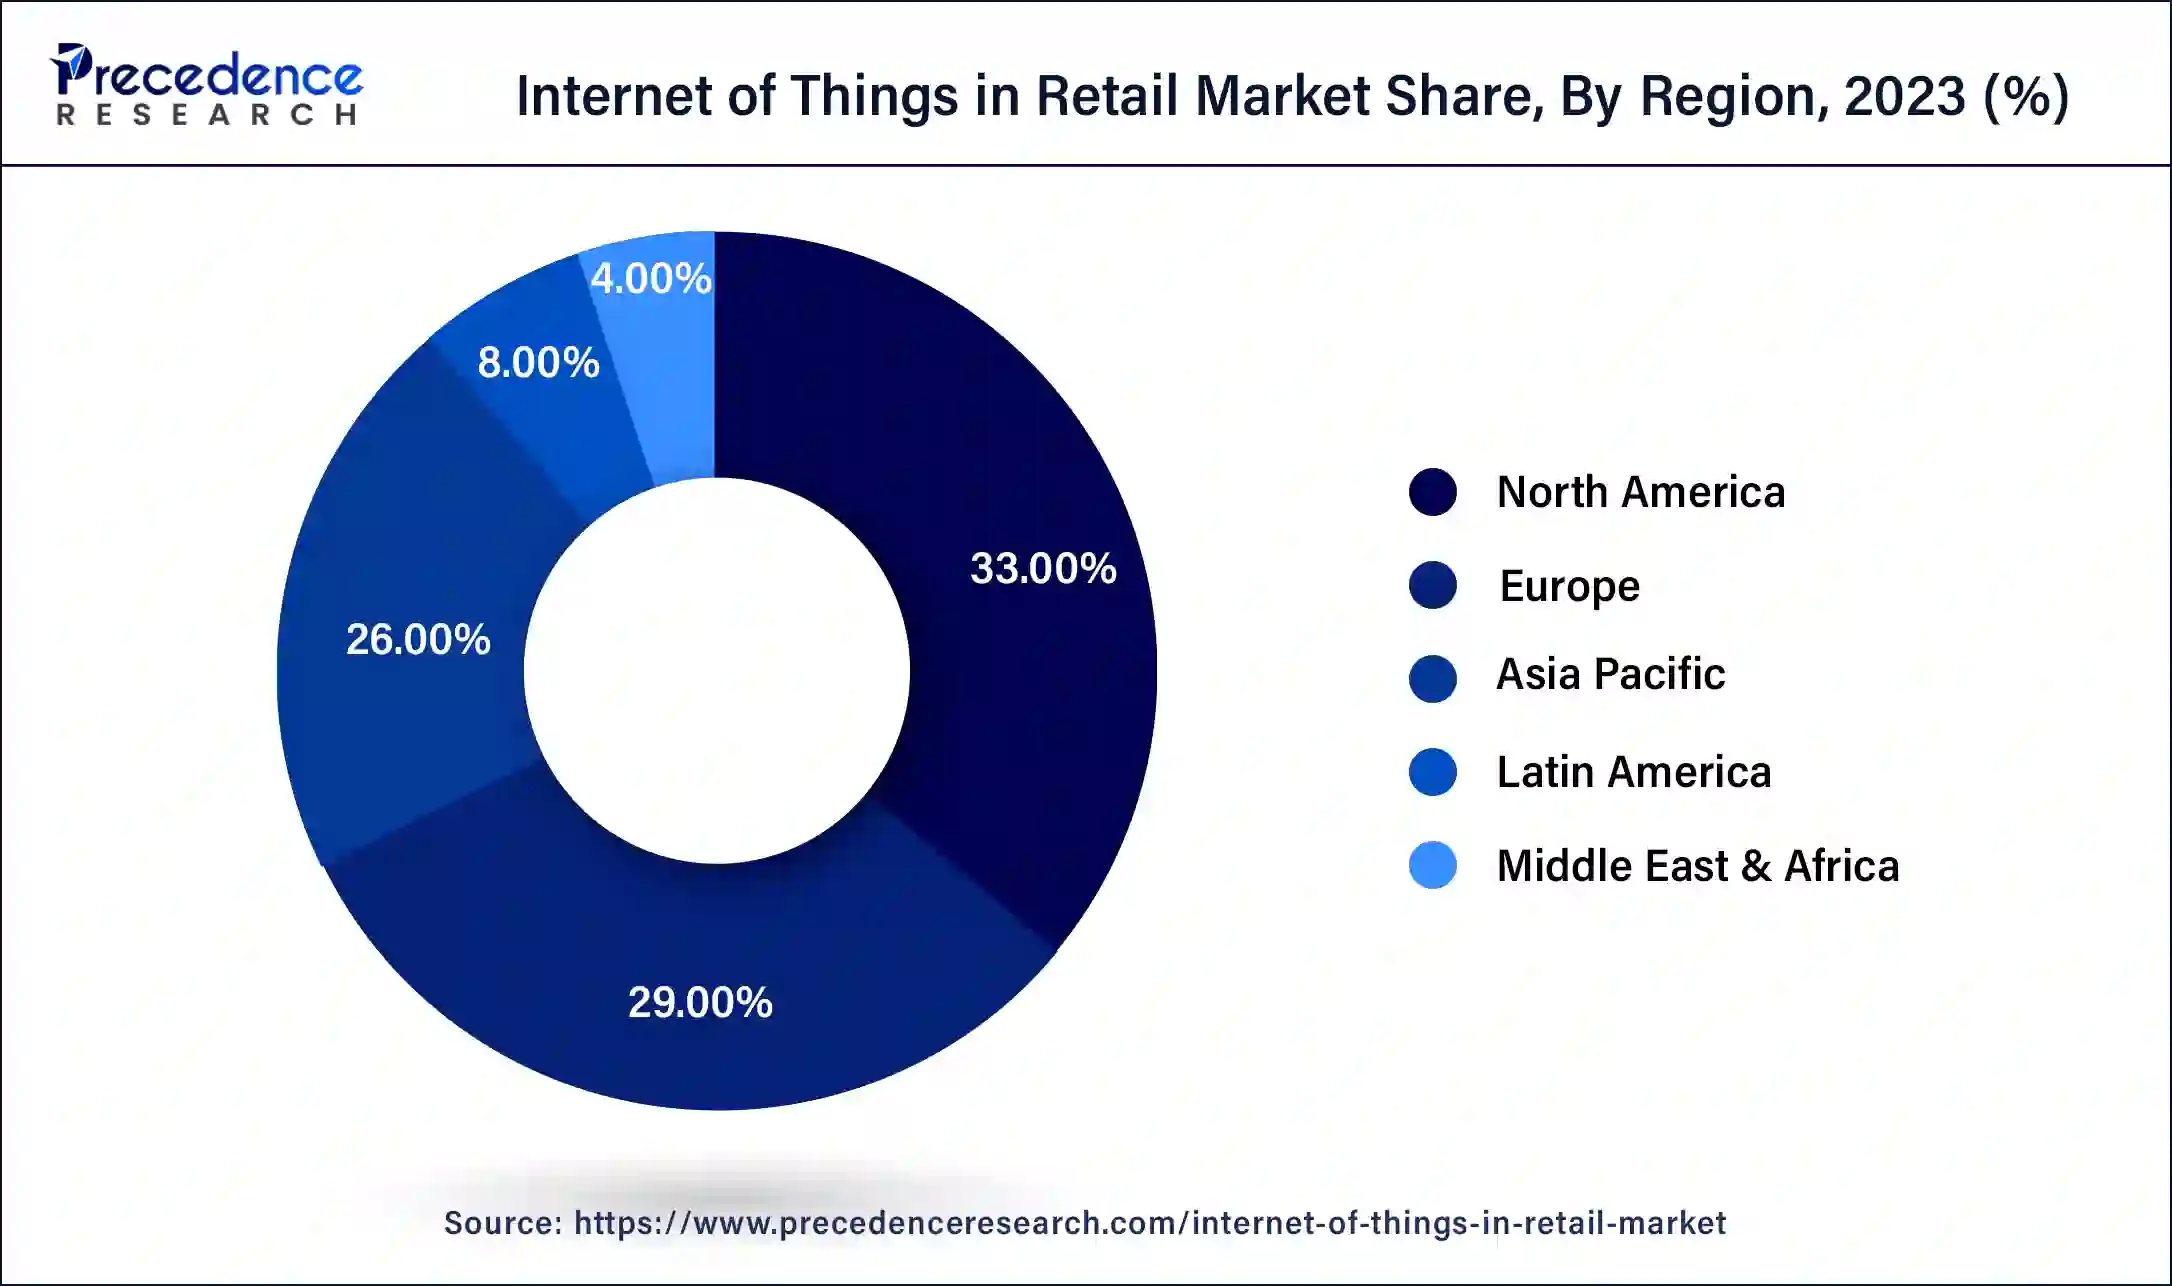 Internet of Things in Retail Market Share, By Region, 2023 (%)